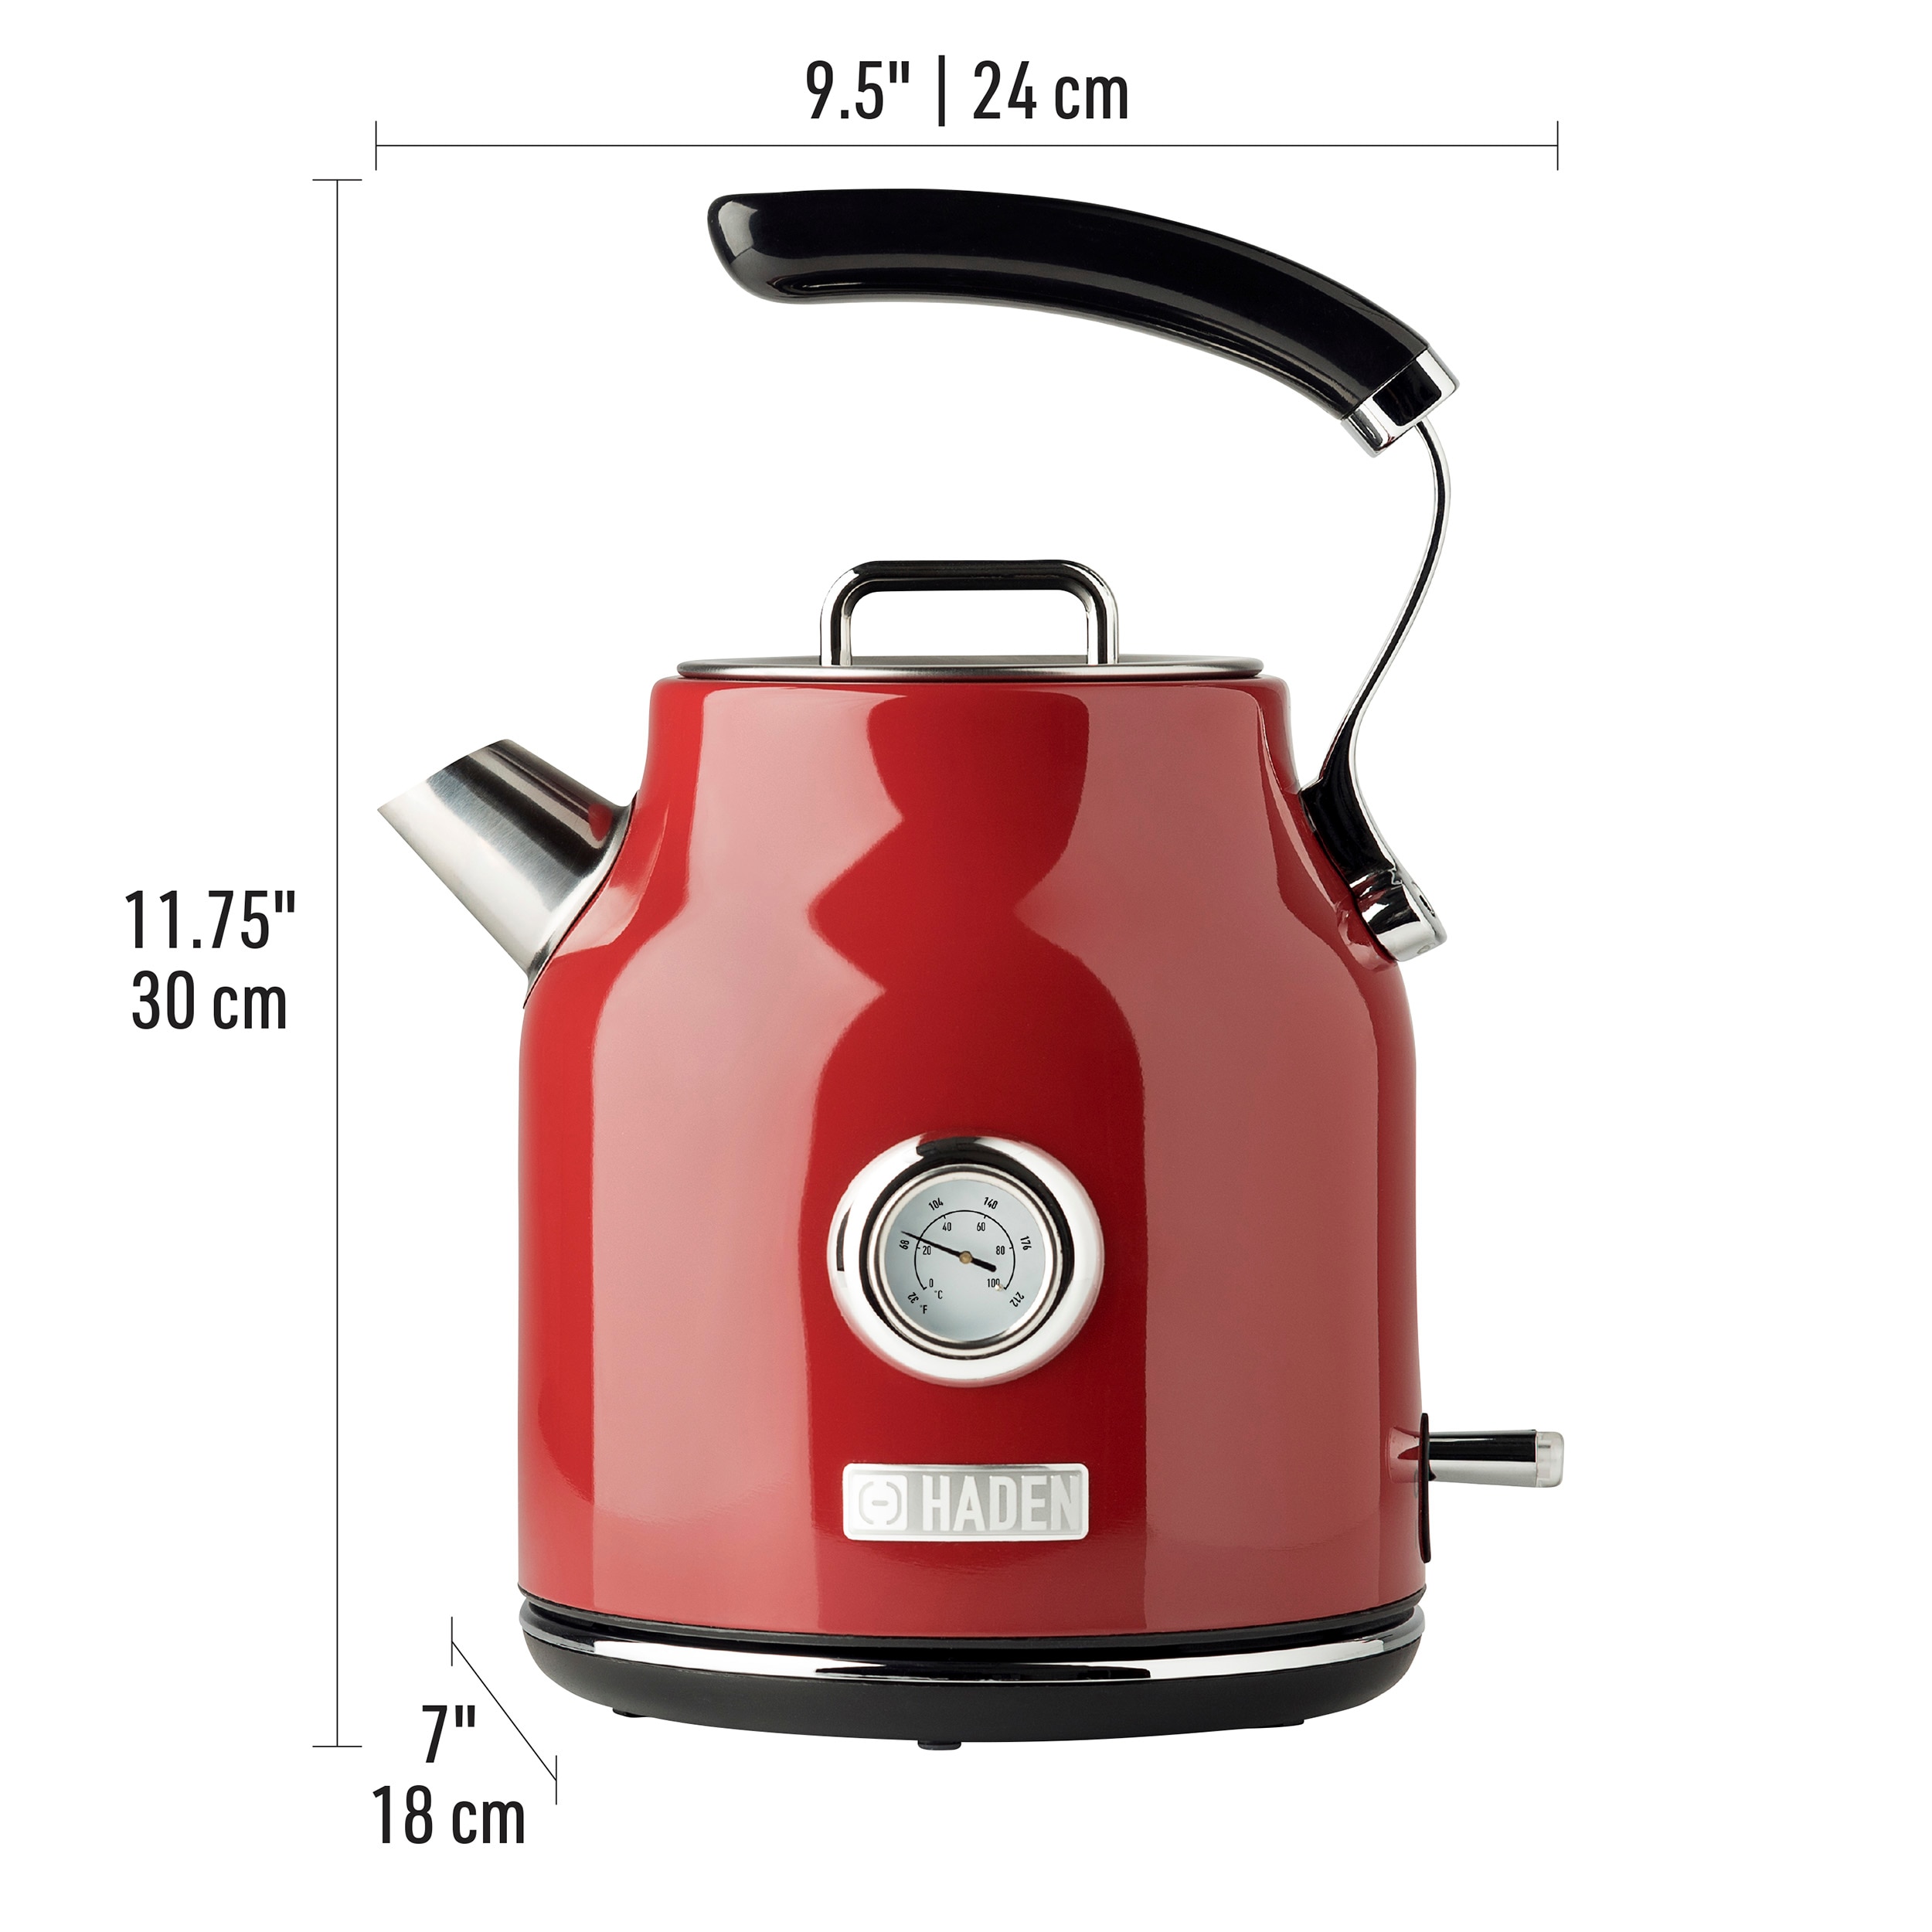 Haden 75025 HIGHCLERE Vintage Retro 1.5 Liter/6 Cup Capacity Innovative  Cordless Electric Stainless Steel Tea Pot Kettle with 360 Degree Base, Pool